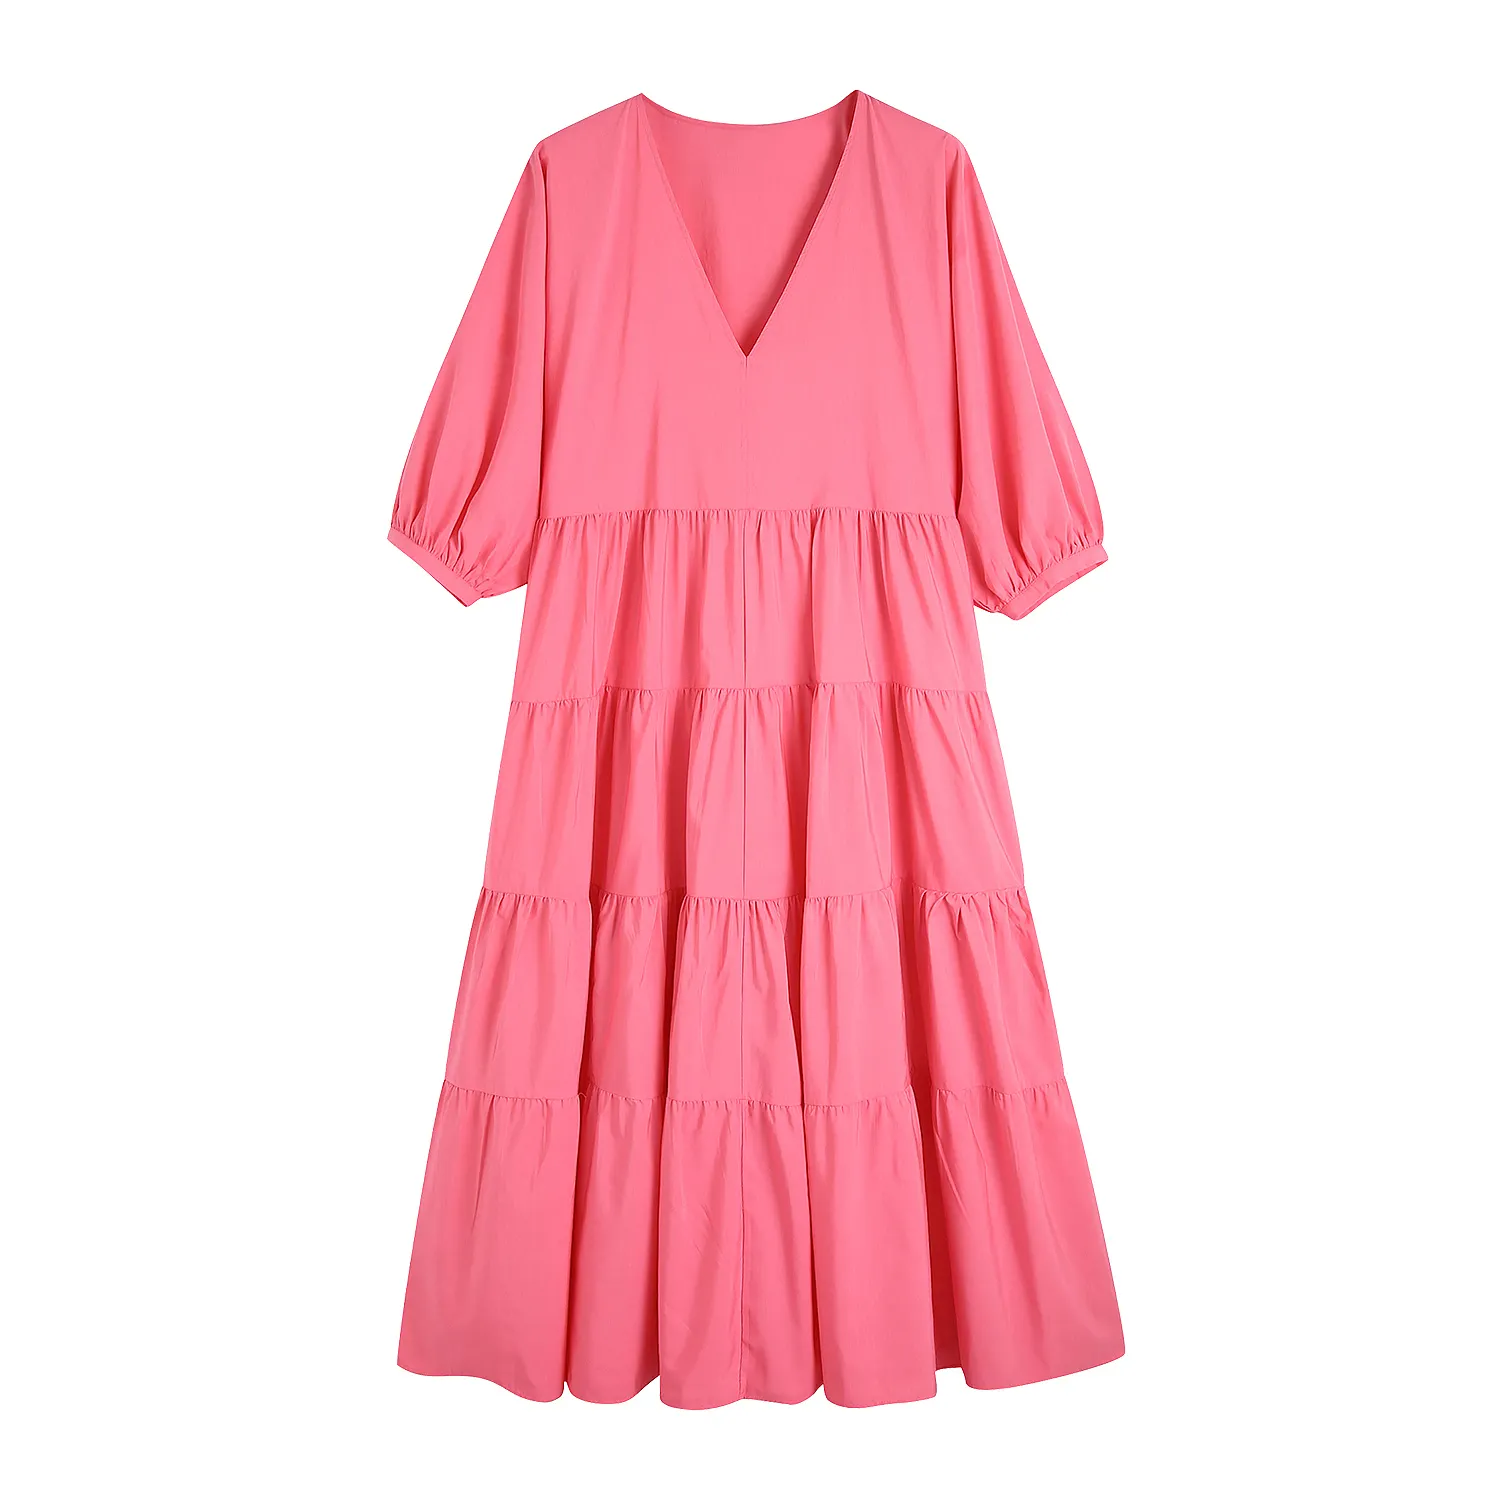 Casual Dresses New New Fashion V Neck Short Sleeve Rose Color Women Casual Long Maxi Summer Dress